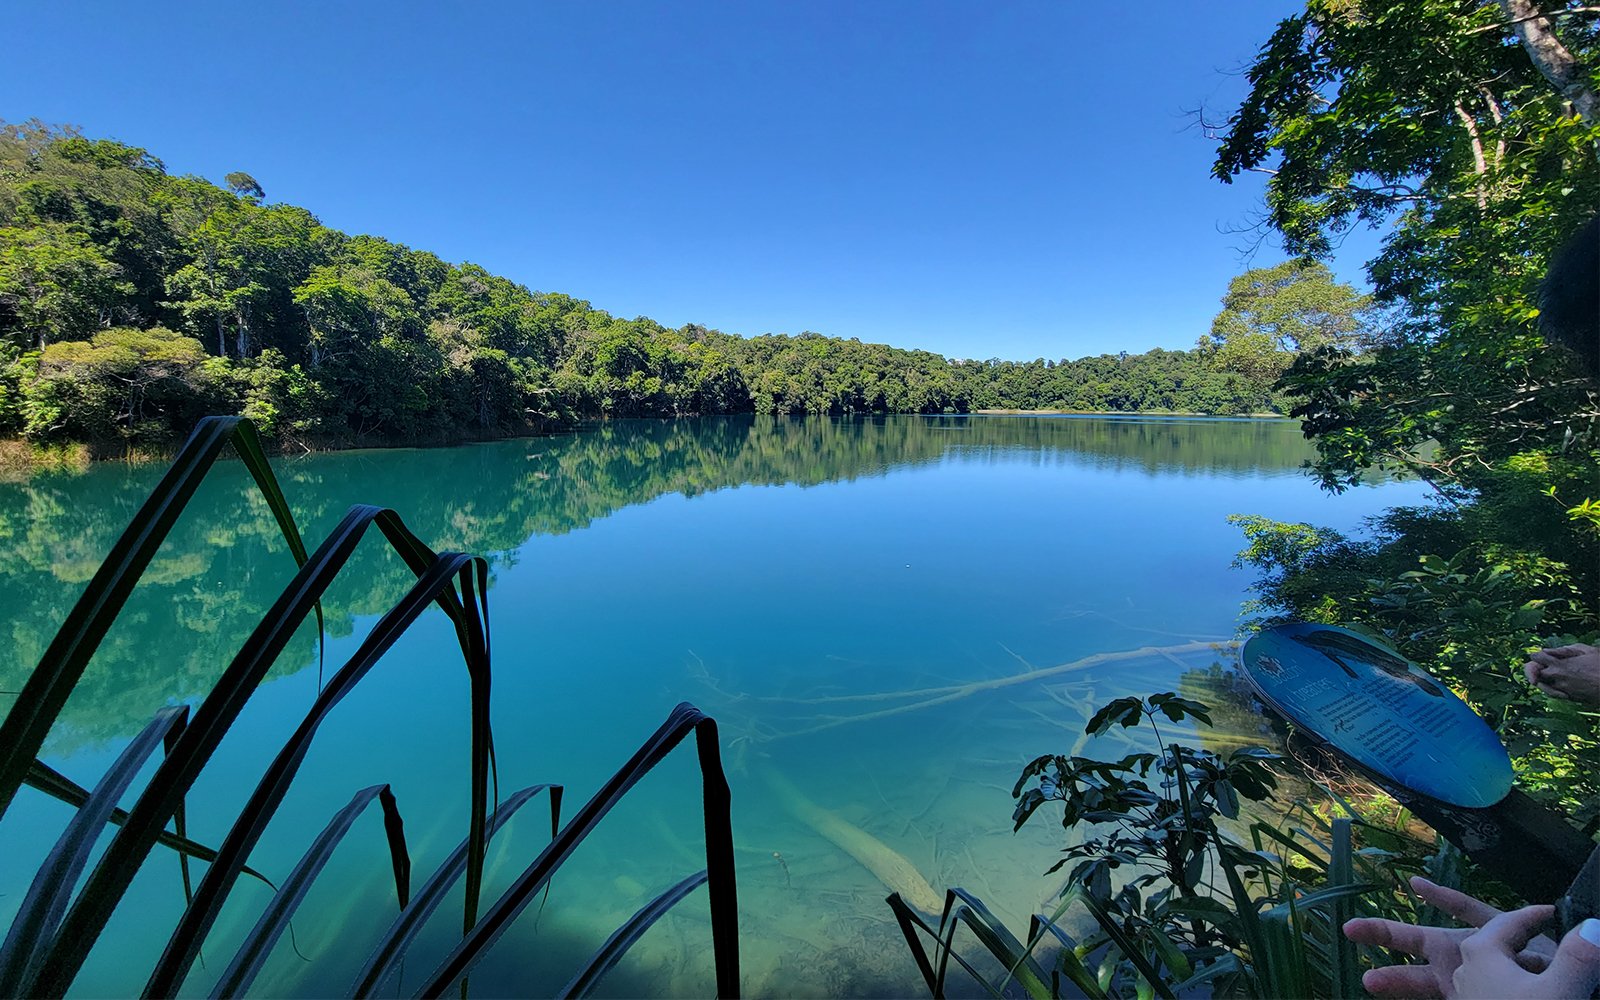 Leaves of plant sticking out in front of pristine blue pond surrounded by forest